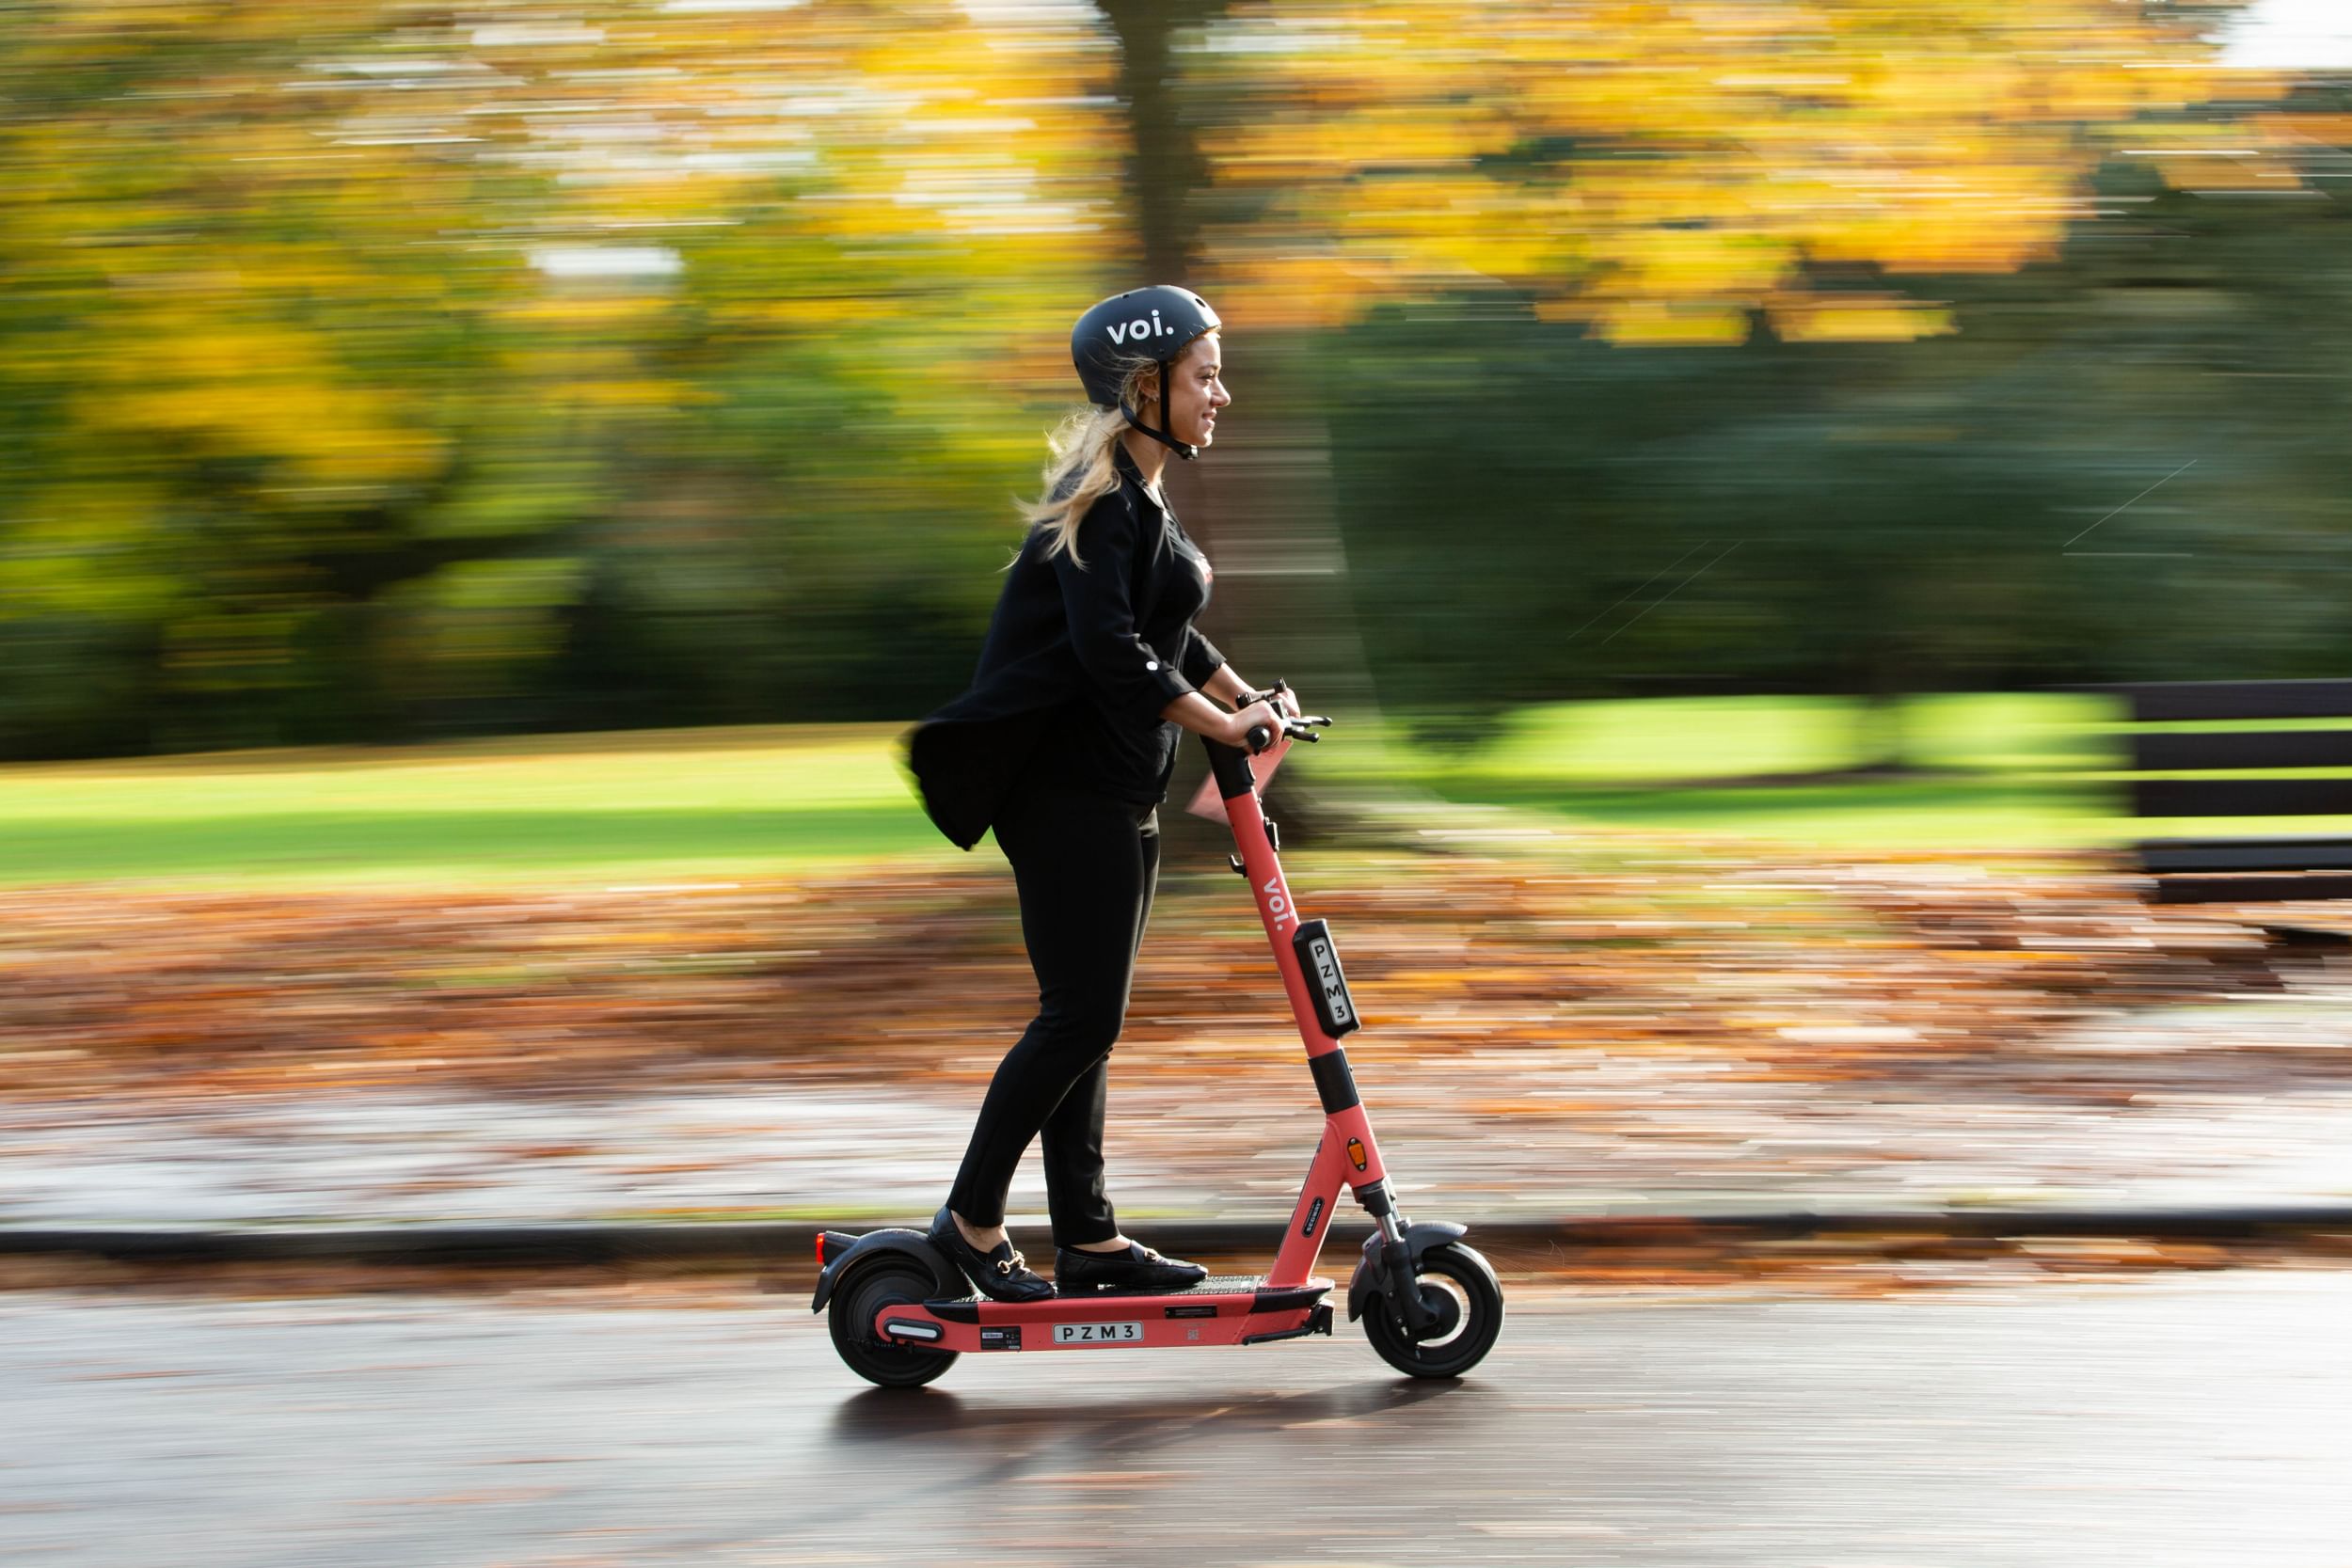 Lady on an e-scooter